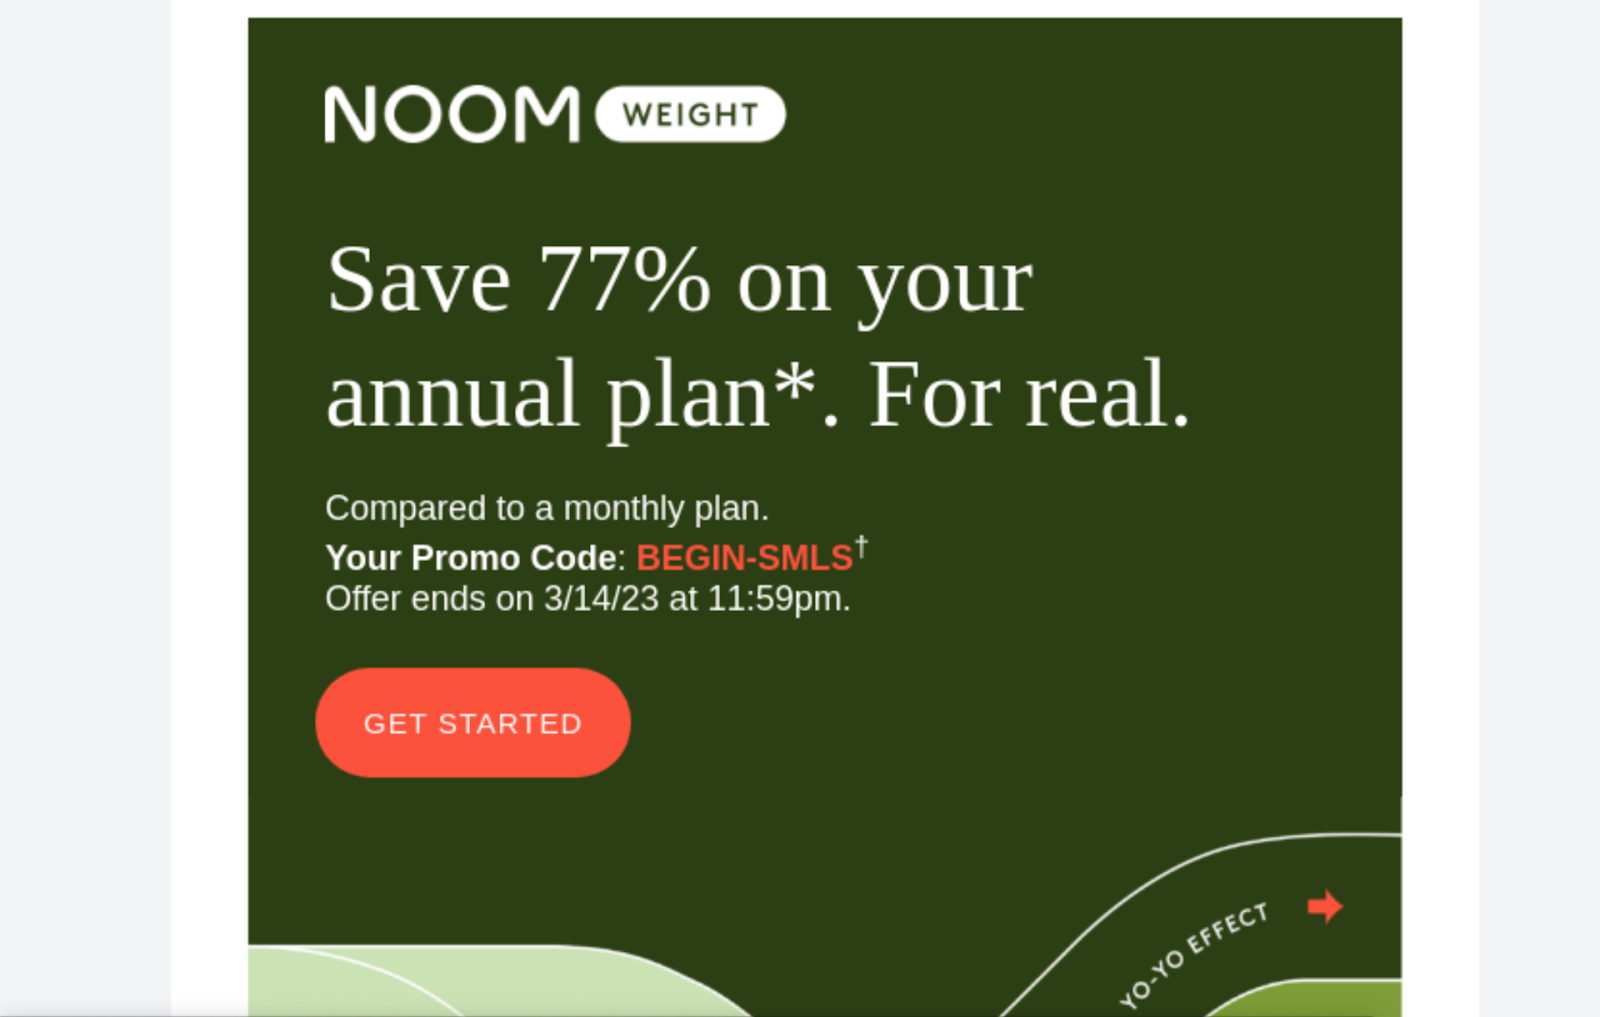 Noom limited-time, exclusive discount